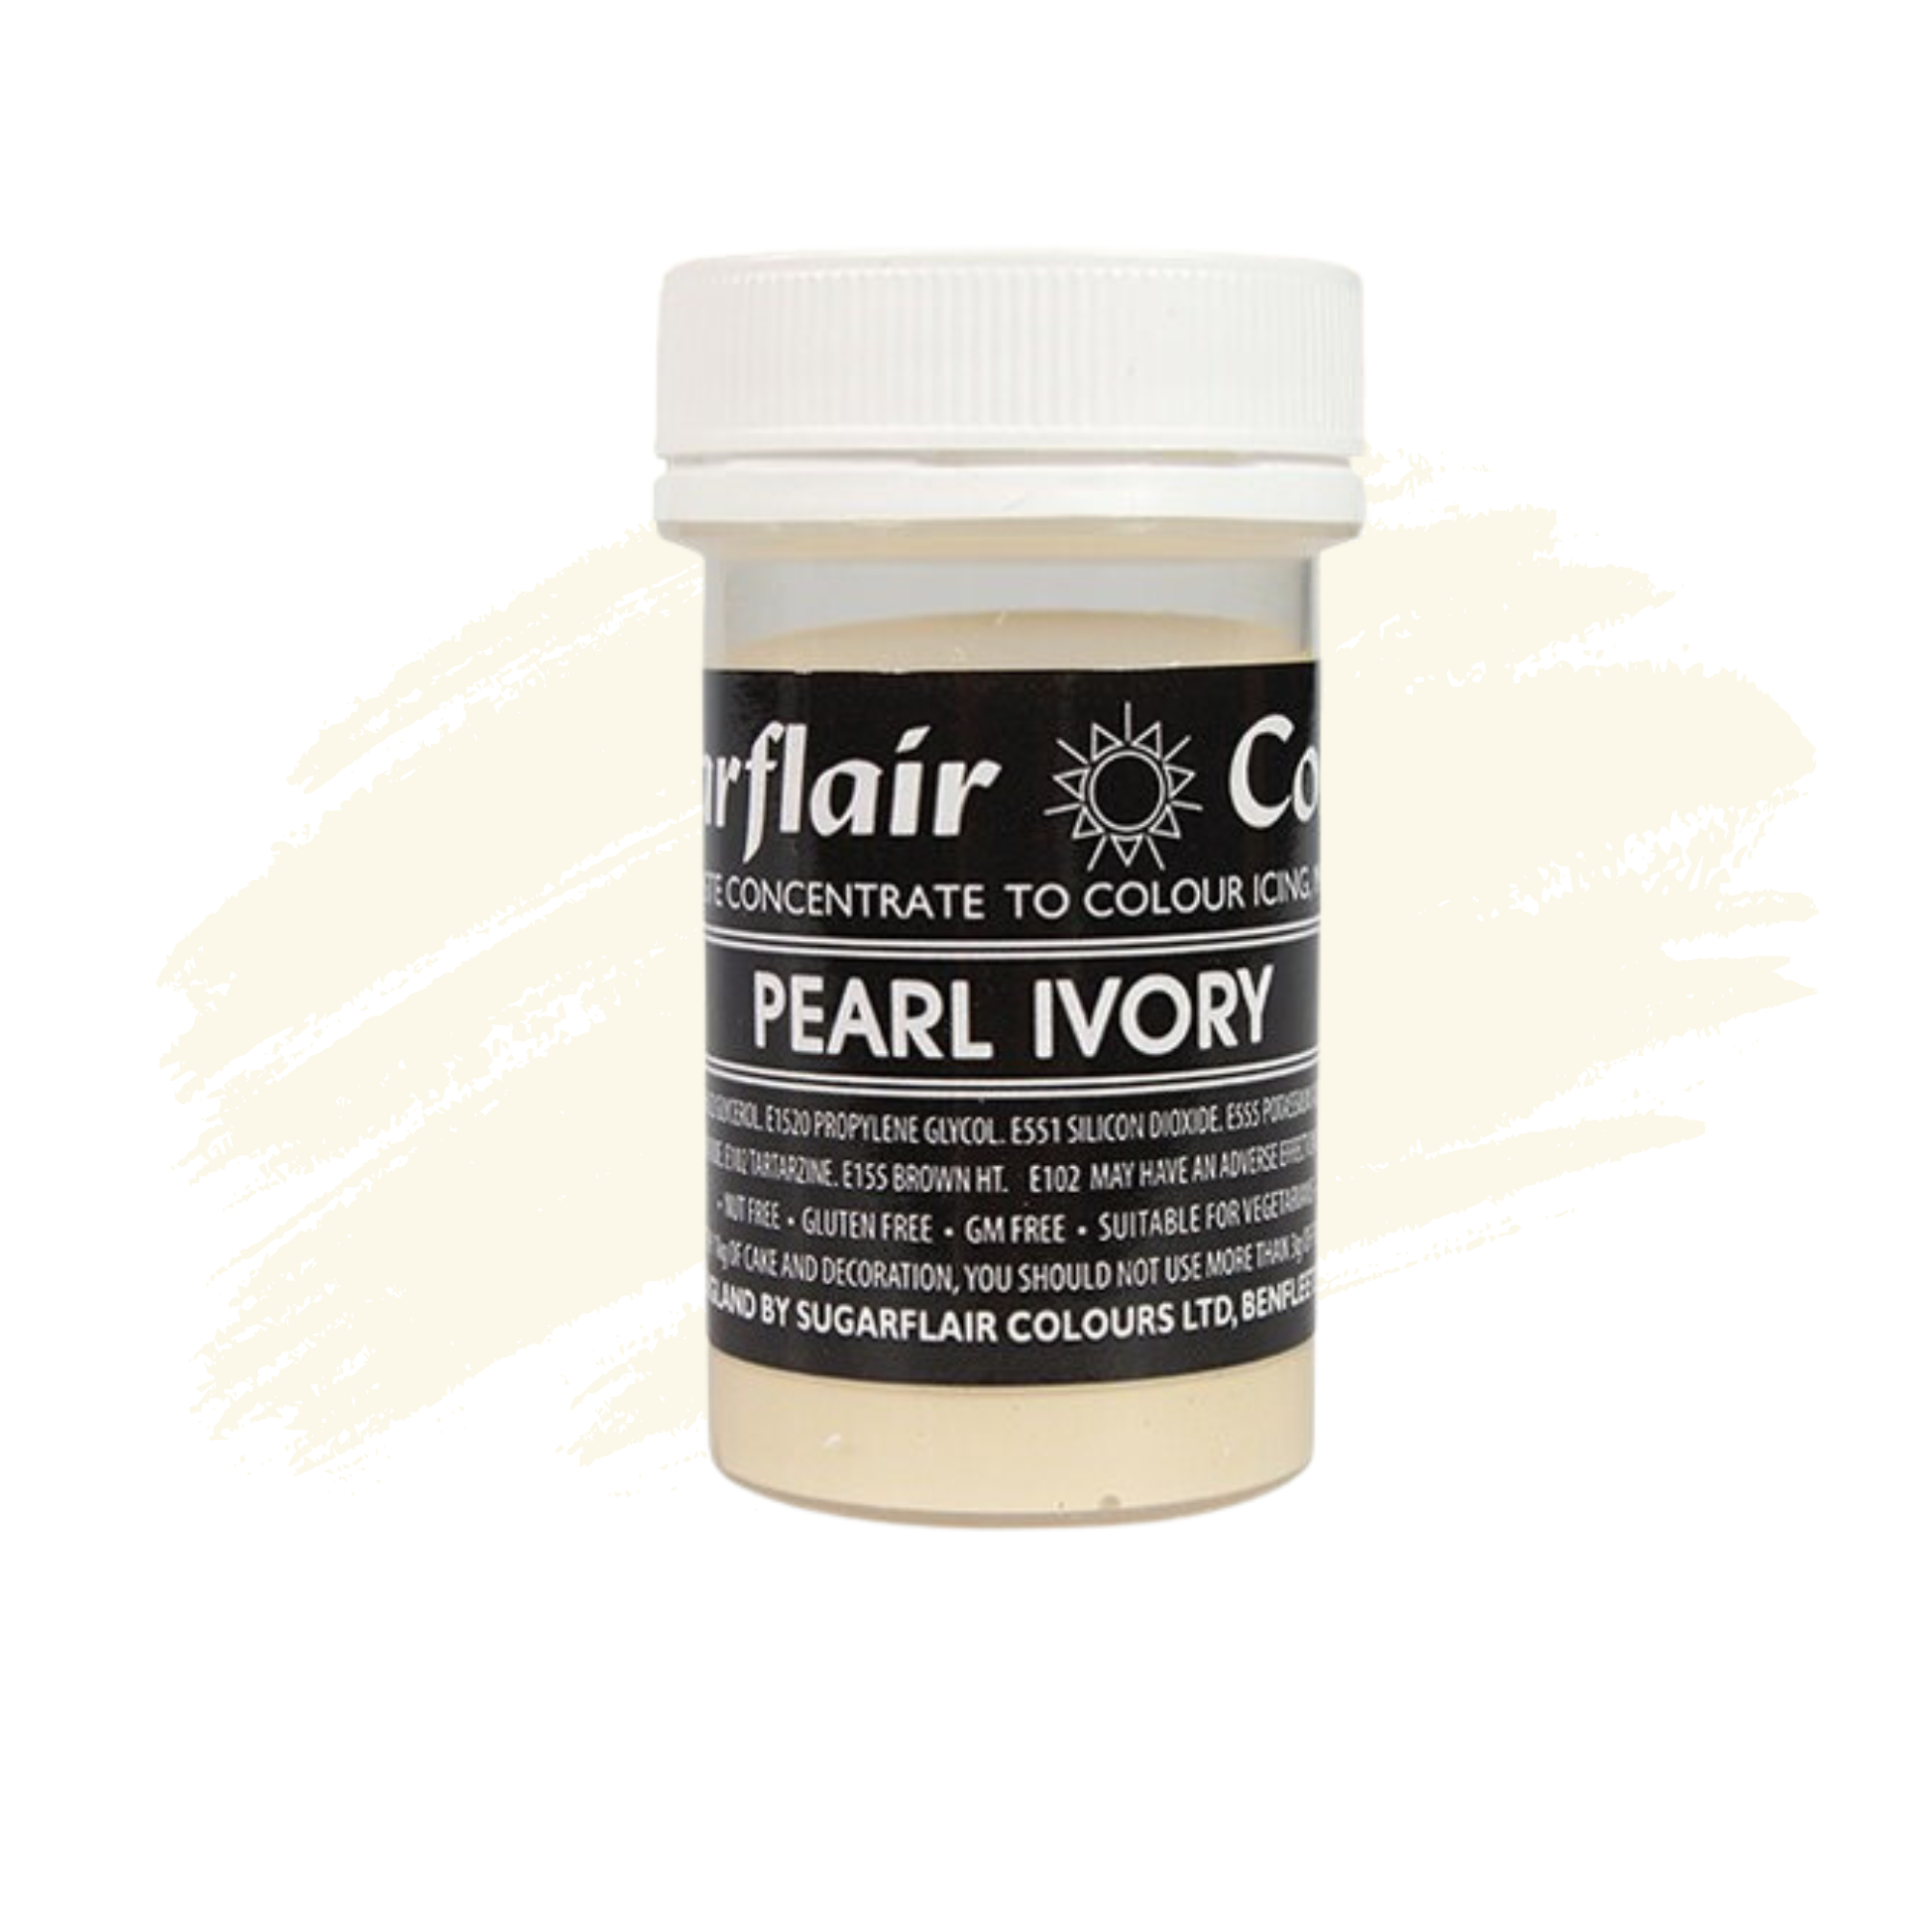 Sugarflair Paste Colours Concentrated Food Colouring - Pastel Pearl Ivory - 25g